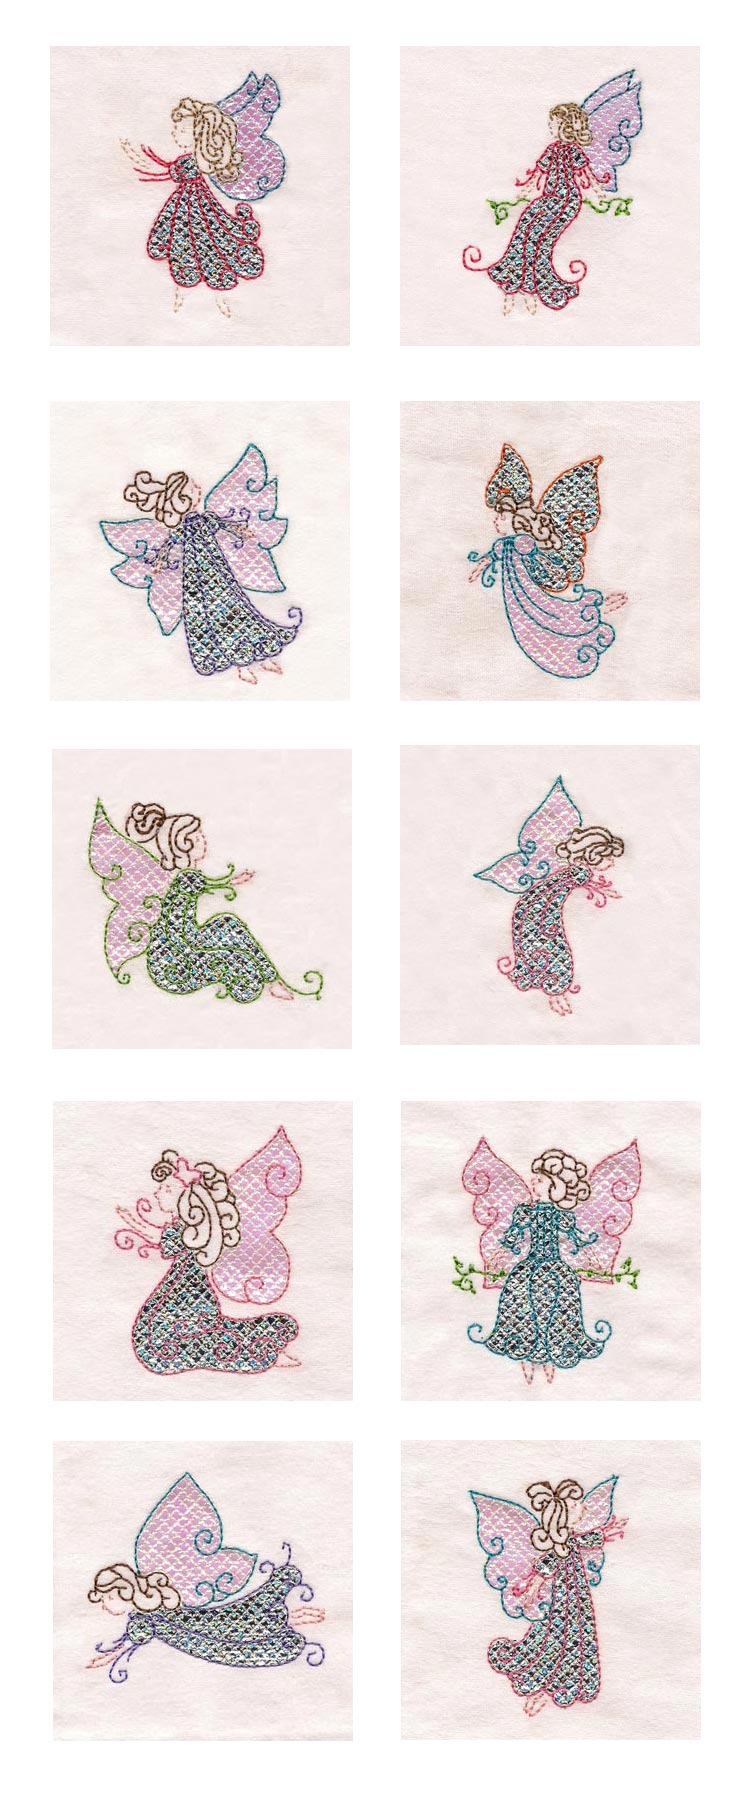 Swirly Butterfly Girls Embroidery Machine Design Details